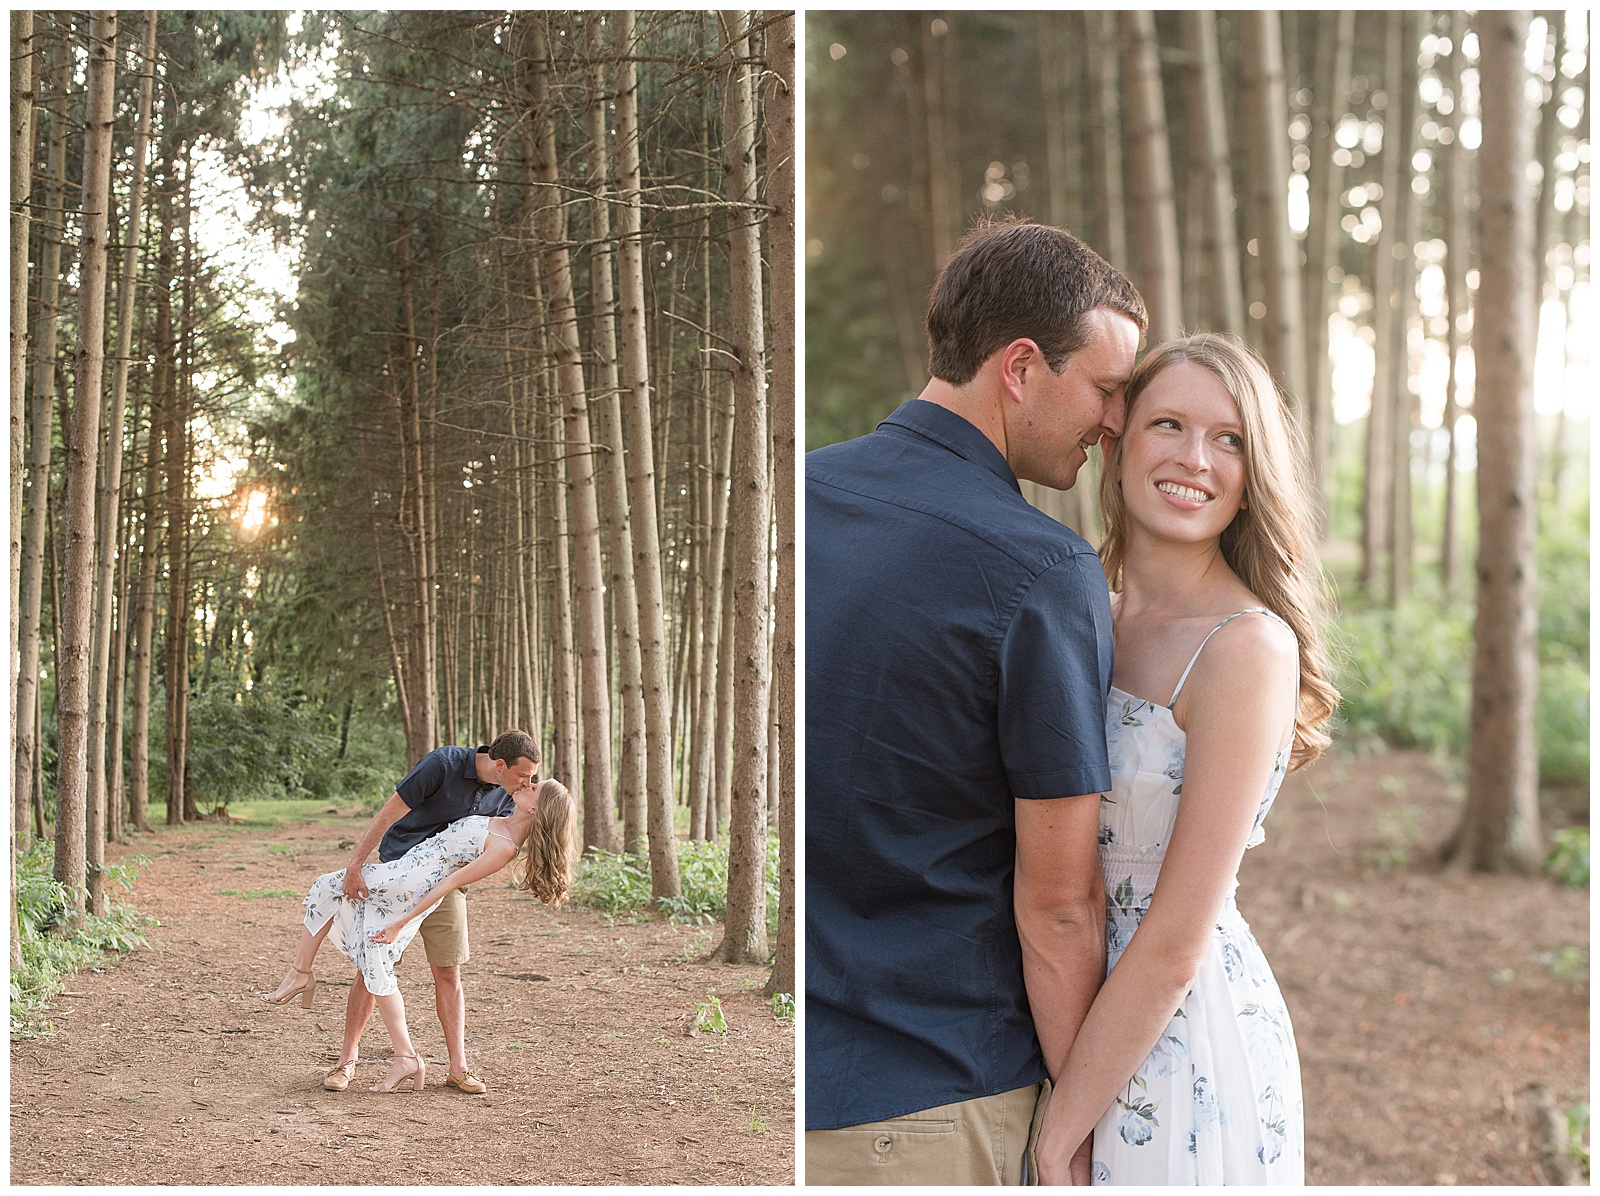 guy dips girl back as they kiss among pine tree grove on sunny summer evening